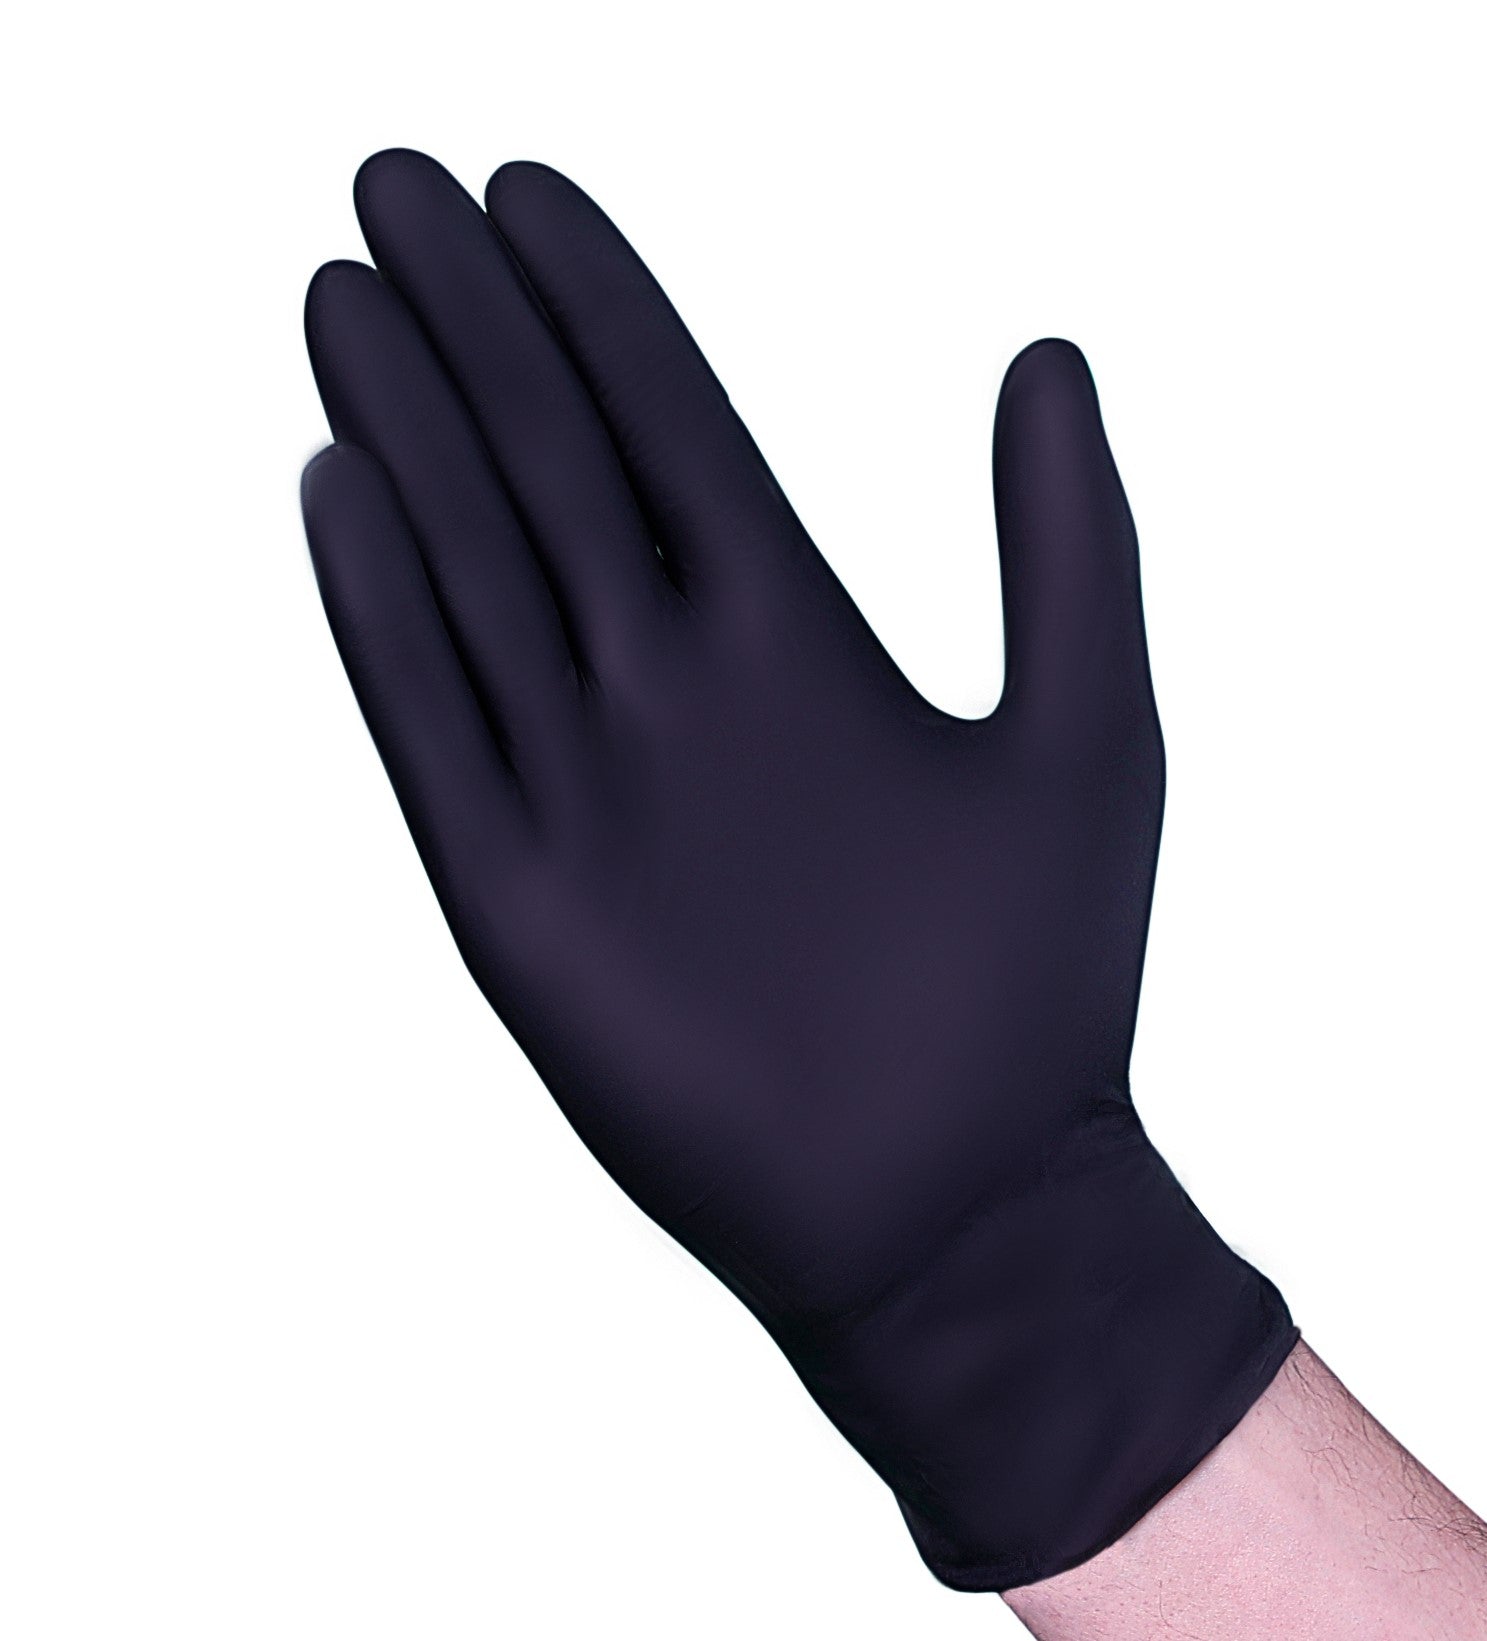 A19A3 Black 7 mil Nitrile Exam Disposable Gloves